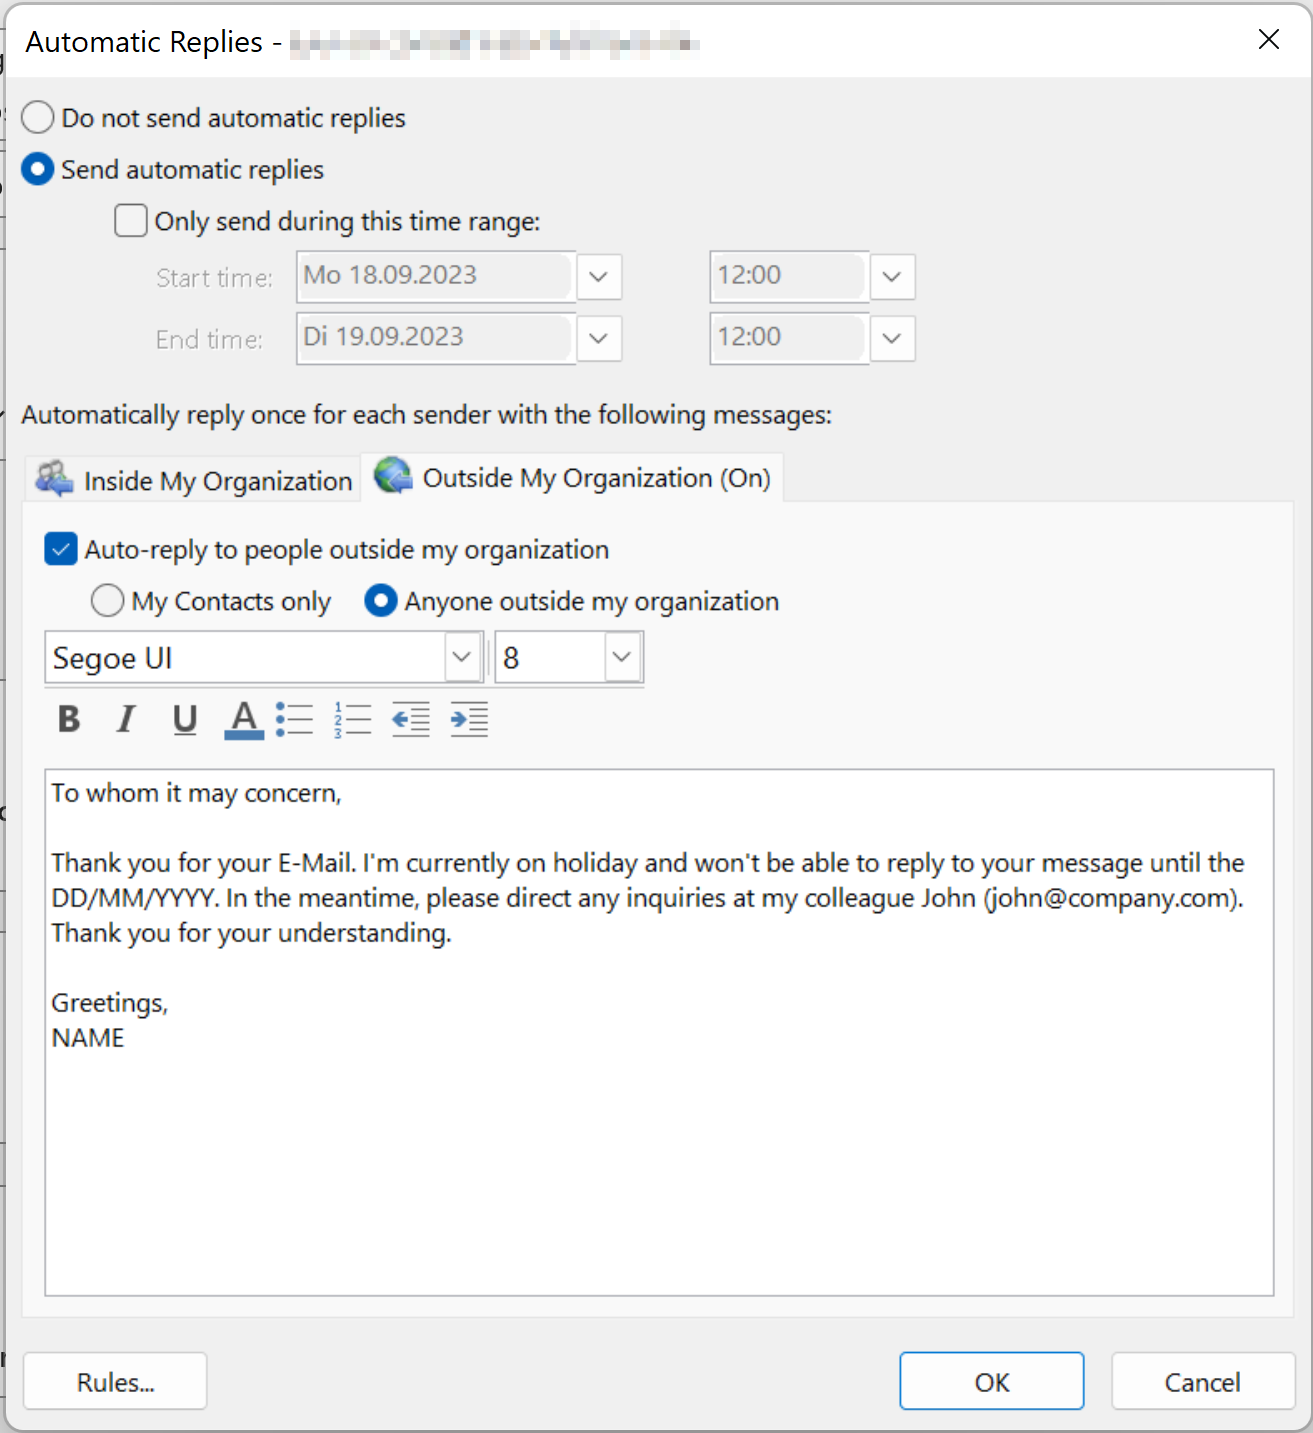 Out of office set up window with the option to designate an automatic reply period